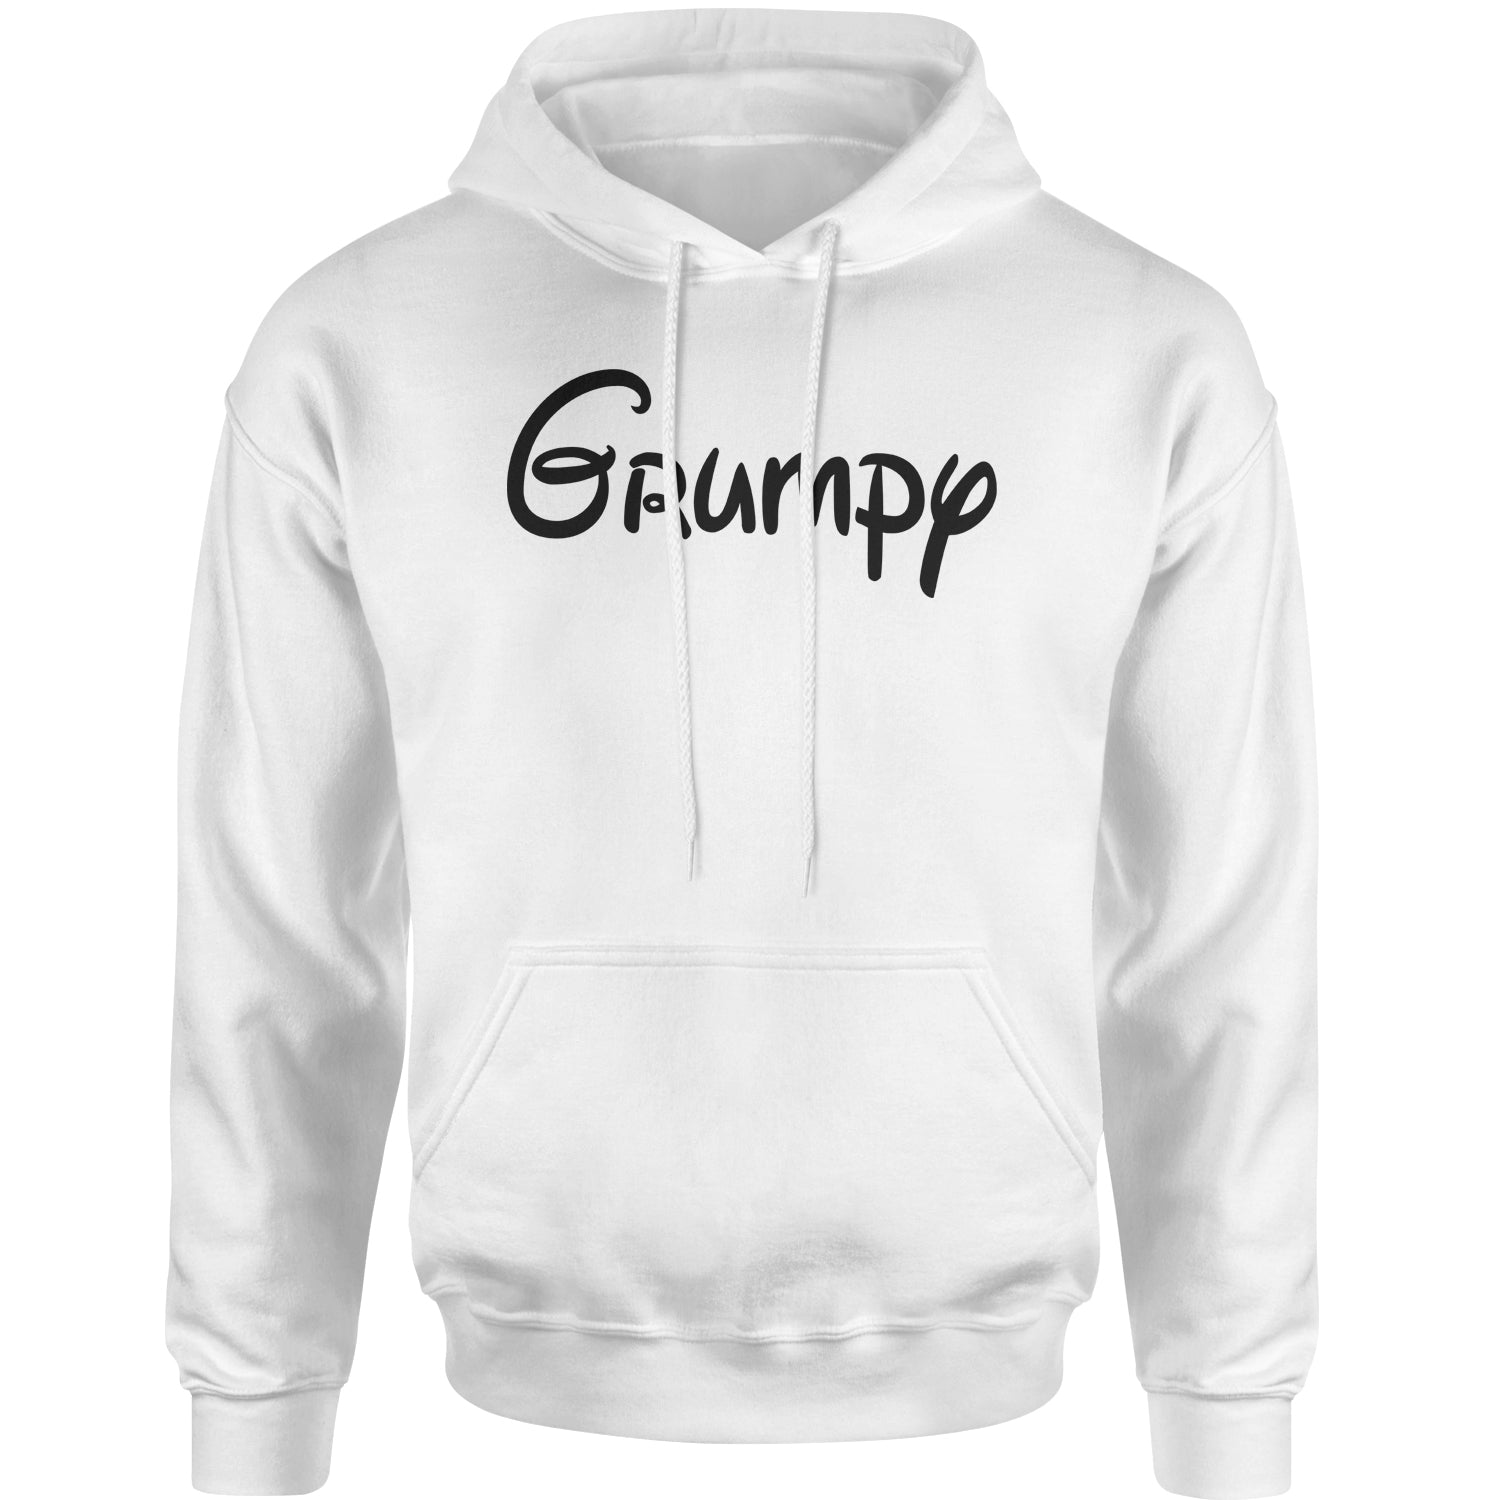 Grumpy - 7 Dwarfs Costume Adult Hoodie Sweatshirt and, costume, dwarfs, group, halloween, matching, seven, snow, the, white by Expression Tees